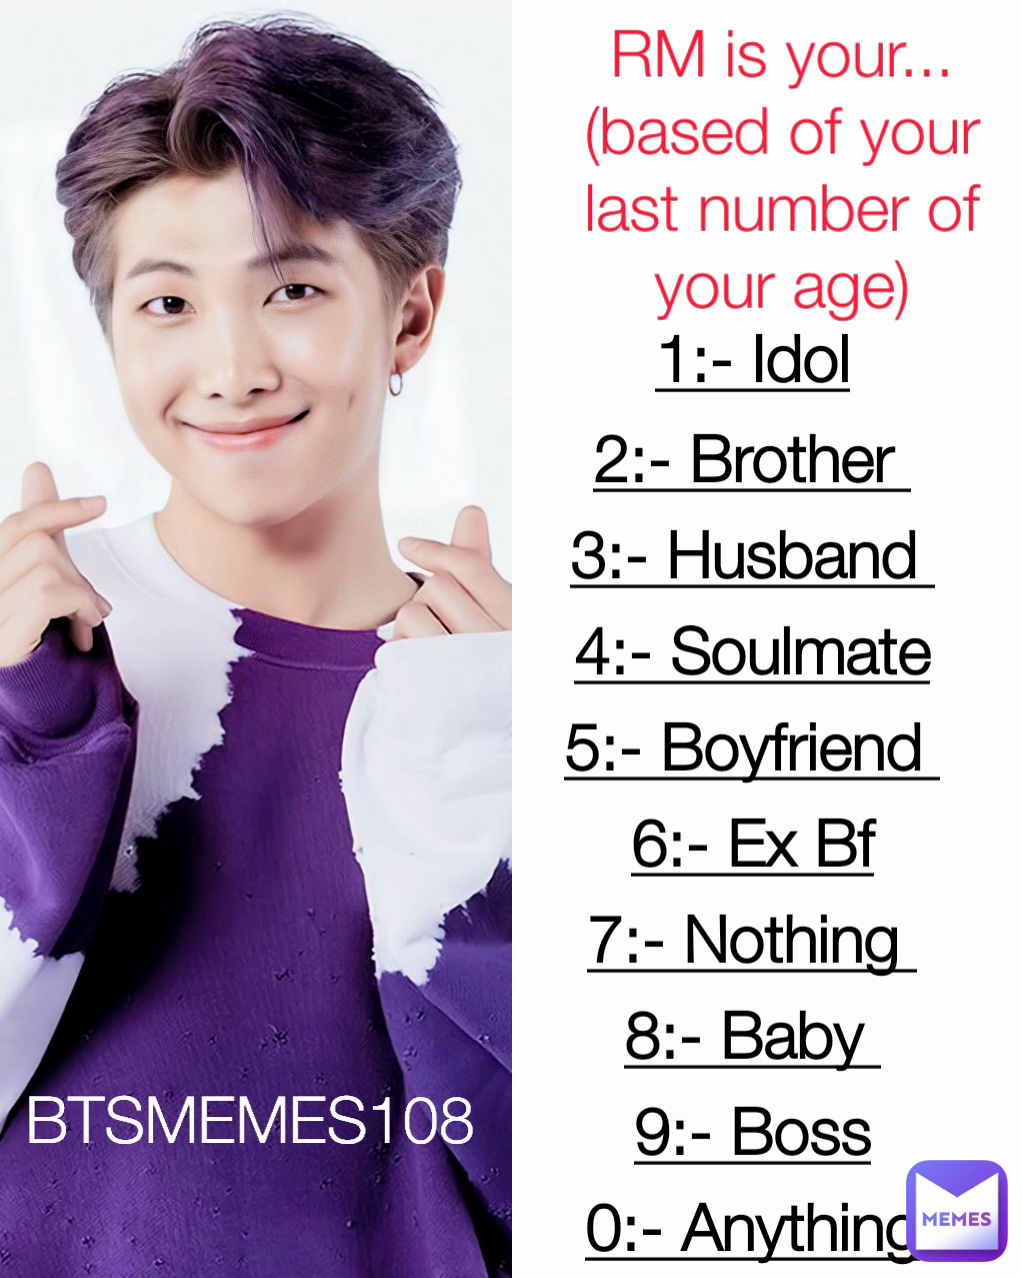 1:- Idol
2:- Brother 
3:- Husband 
4:- Soulmate
5:- Boyfriend 
6:- Ex Bf
7:- Nothing 
8:- Baby 
9:- Boss
0:- Anything RM is your...
(based of your last number of your age) BTSMEMES108 